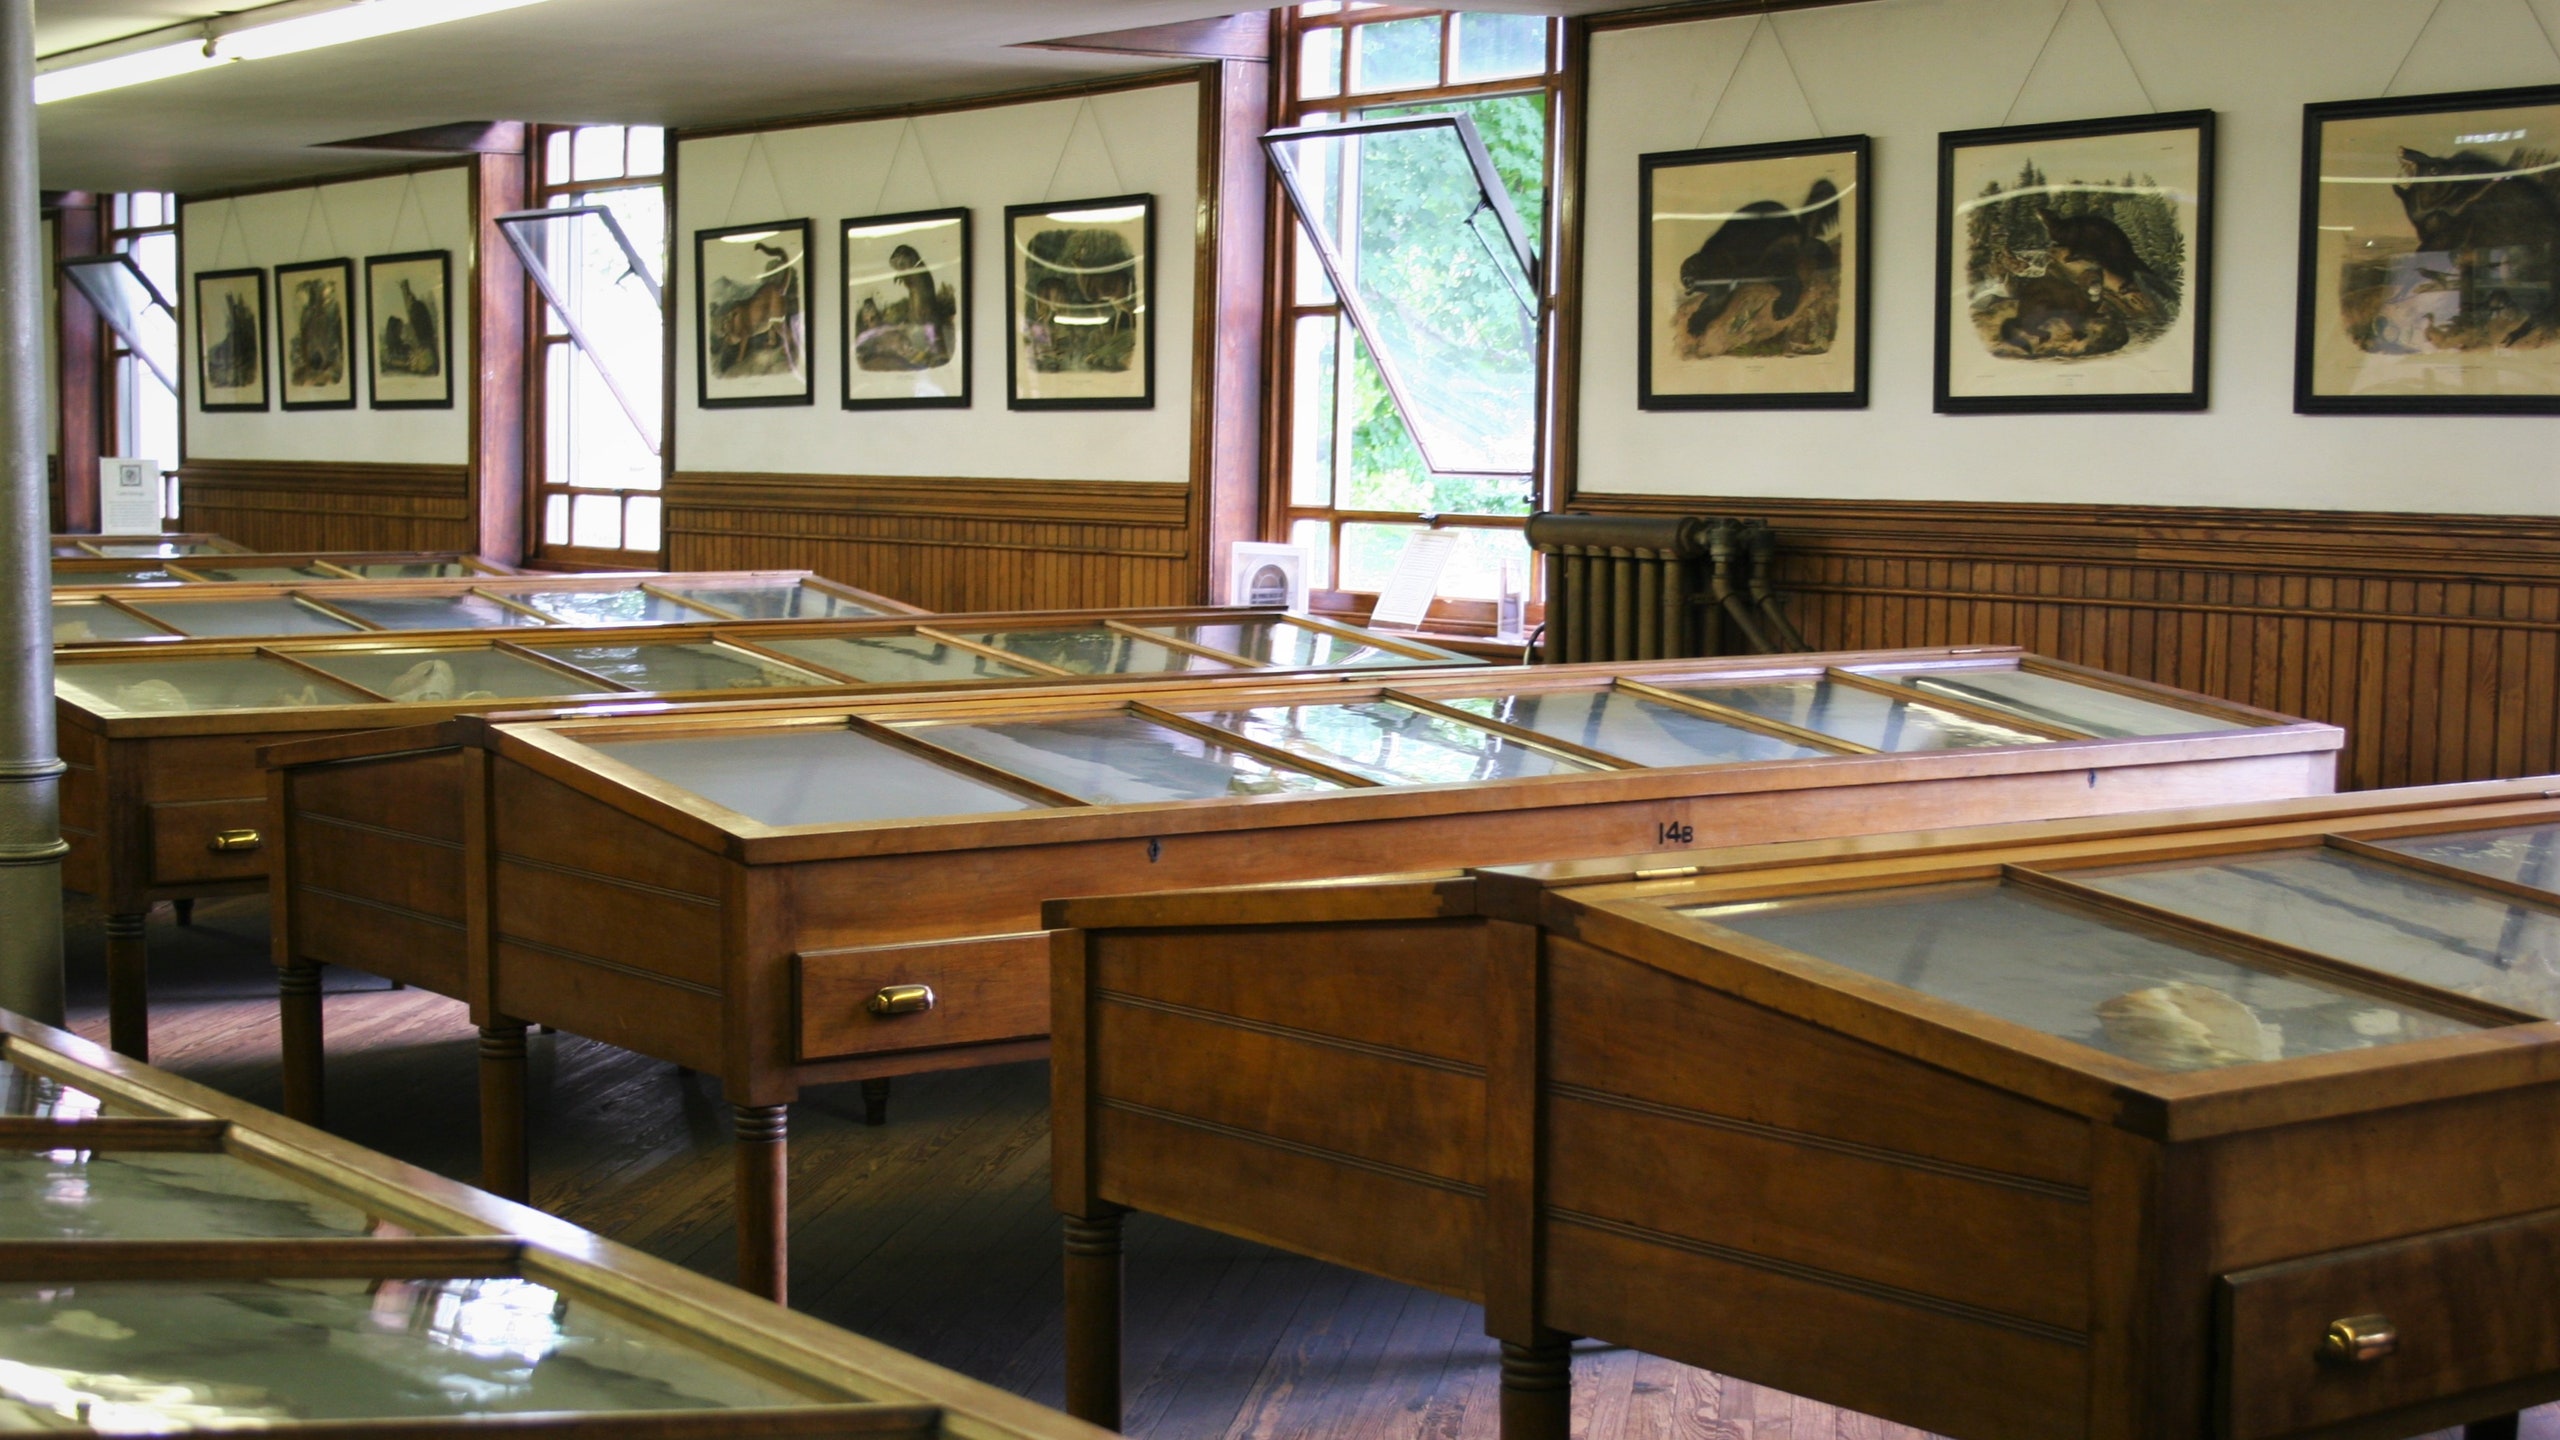 William Wagner Free Institute for Science. Art Painting Wood Architecture Building Indoors Museum Jewelry Store Shop...